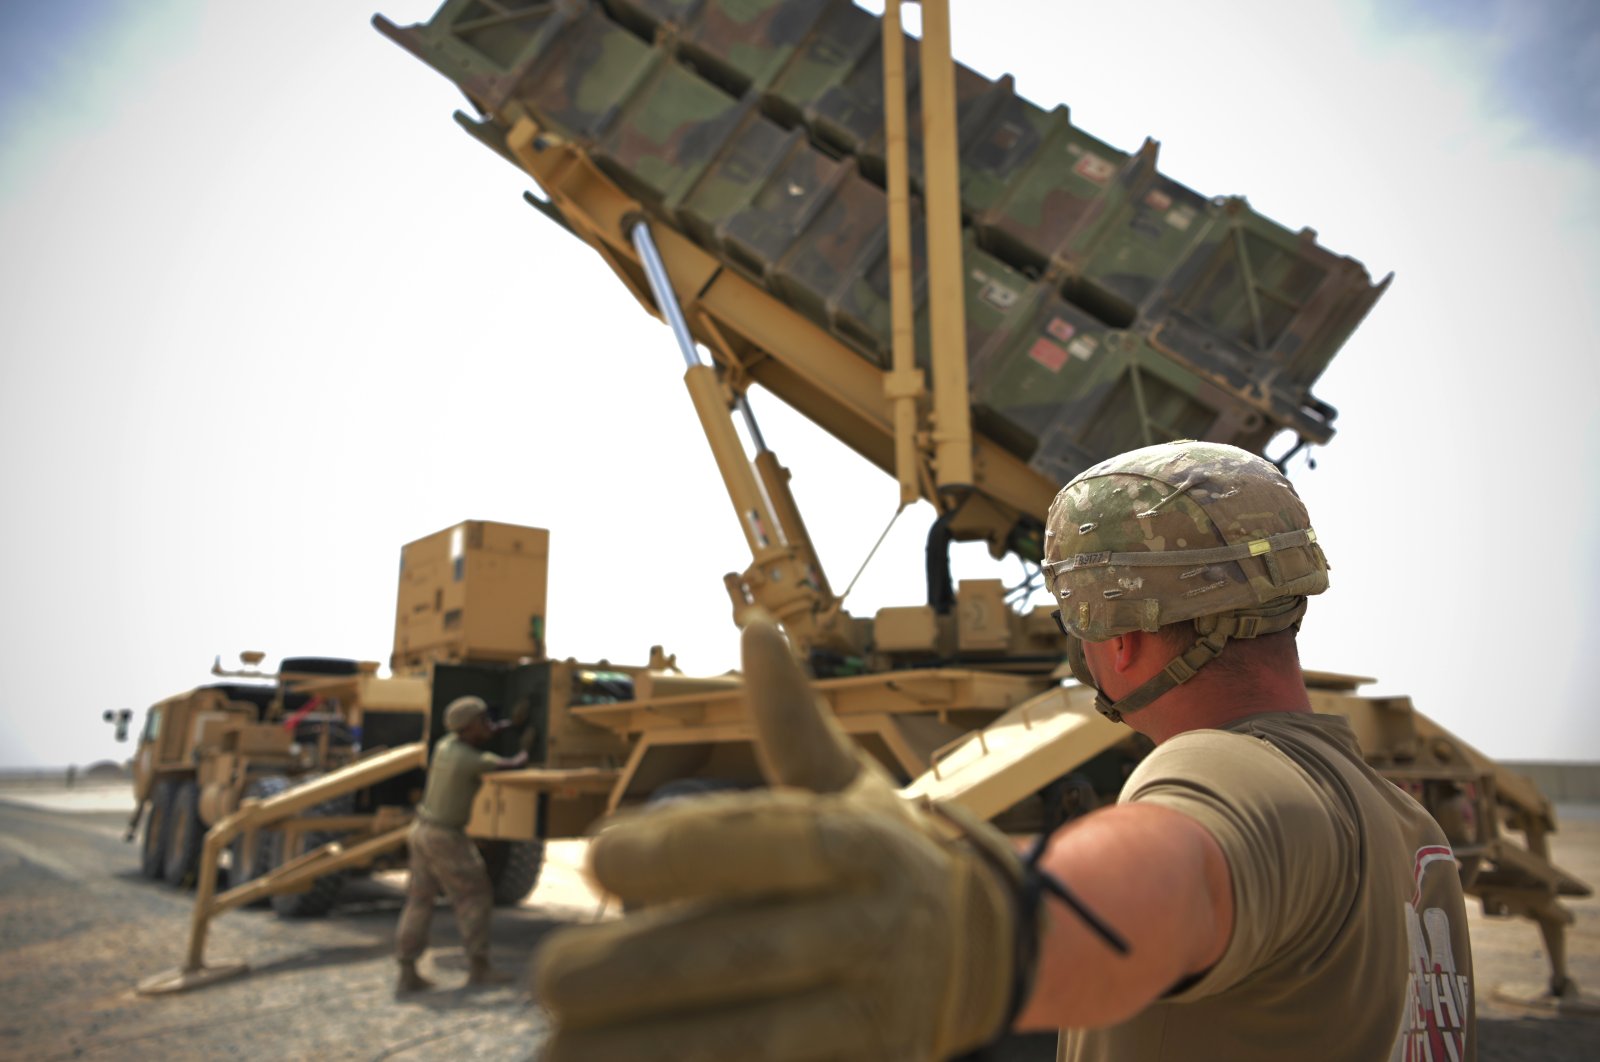 In this photo released by the U.S. Air Force, U.S. Army Spc. Scottlin Bartlett of the 5-52 Air Defense Artillery Battalion signals to a colleague while working near a Patriot missile battery at Al-Dhafra Air Base in Abu Dhabi, United Arab Emirates, May 5, 2021. (AP Photo)